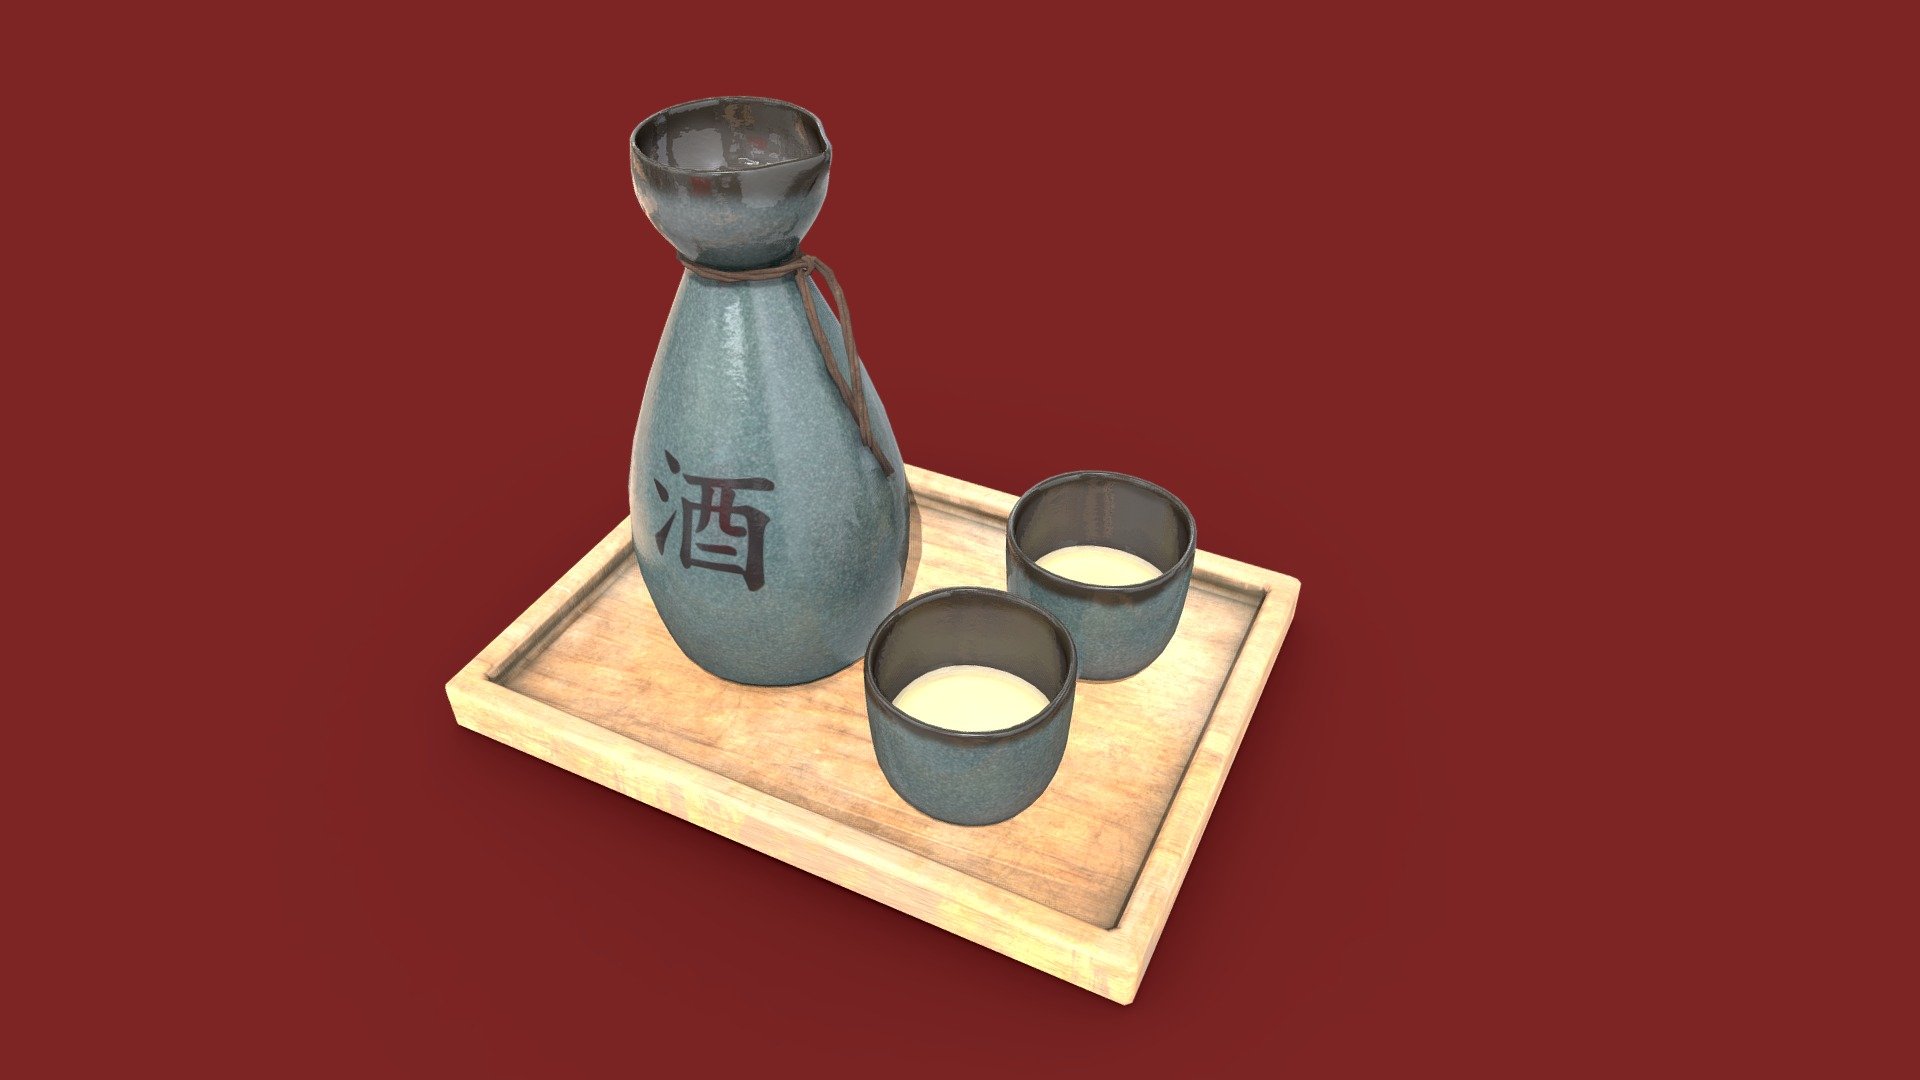 Sake, also spelled saké, is an alcoholic beverage of Japanese origin made by fermenting rice that has been polished to remove the bran. Wikipedia - Sake - 3D model by Pixel (@stefan.lengyel1) 3d model